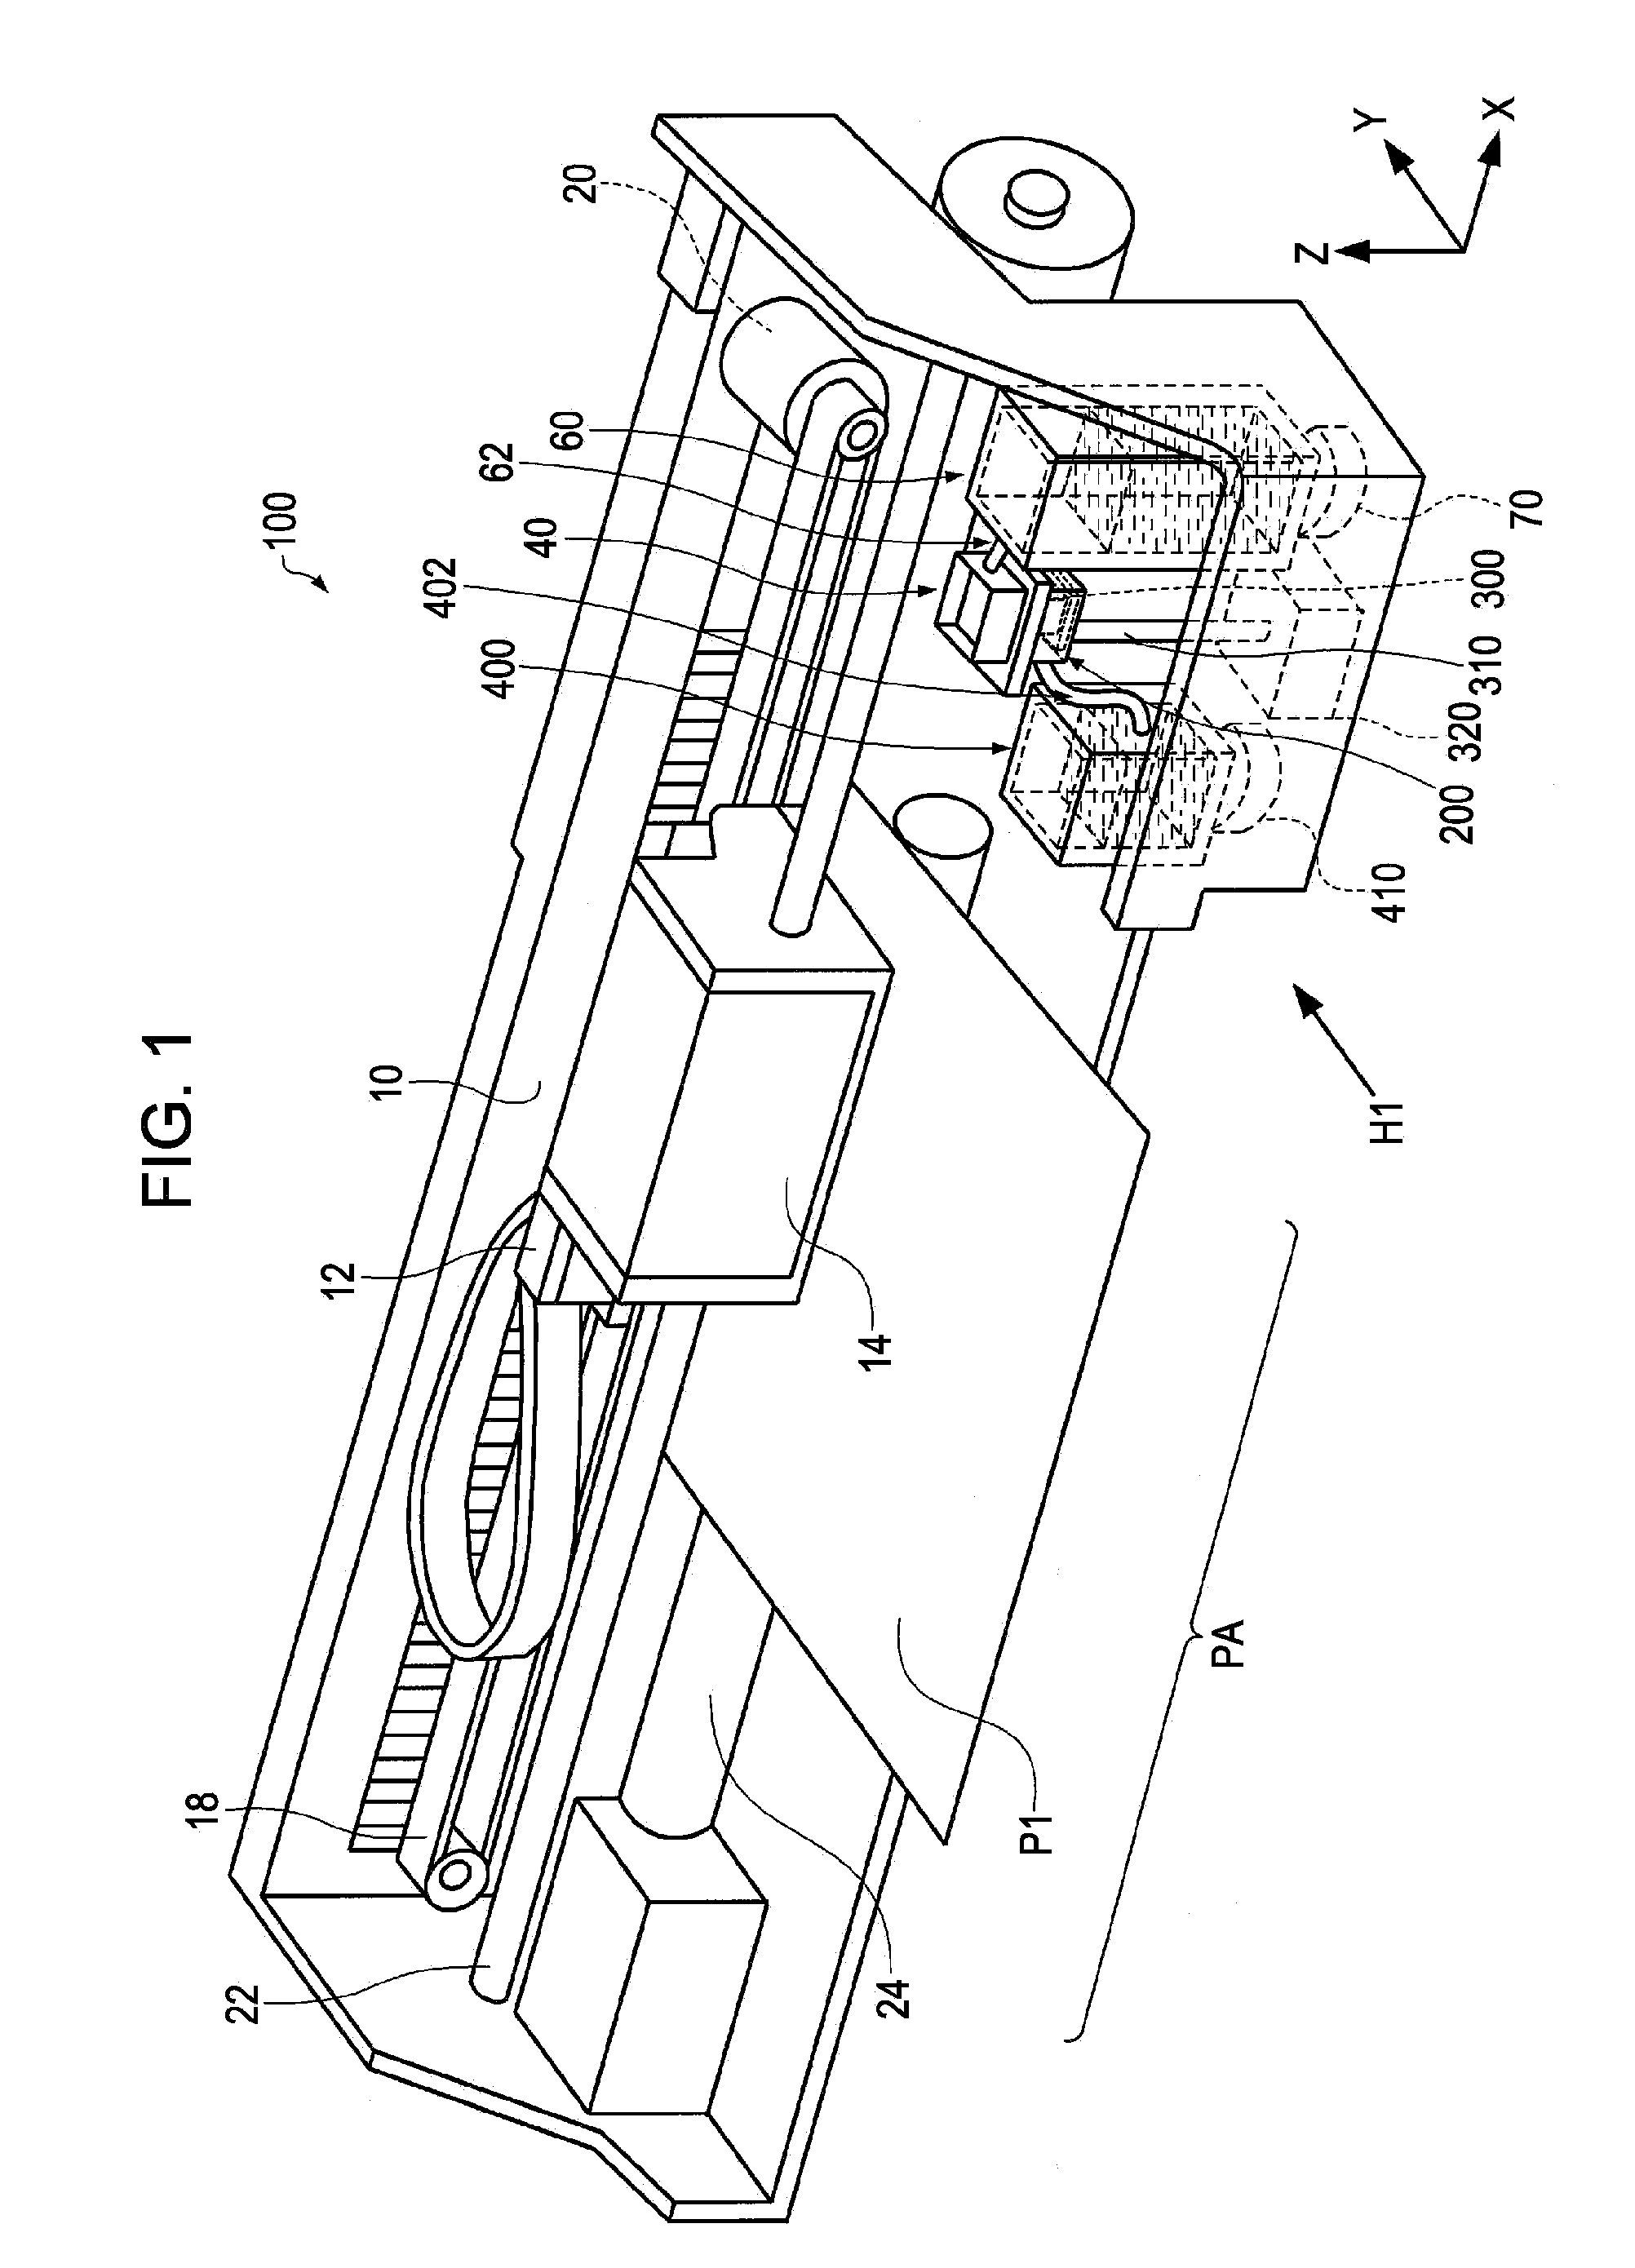 Ink jet recording apparatus and maintenance liquid for ink jet recording apparatus